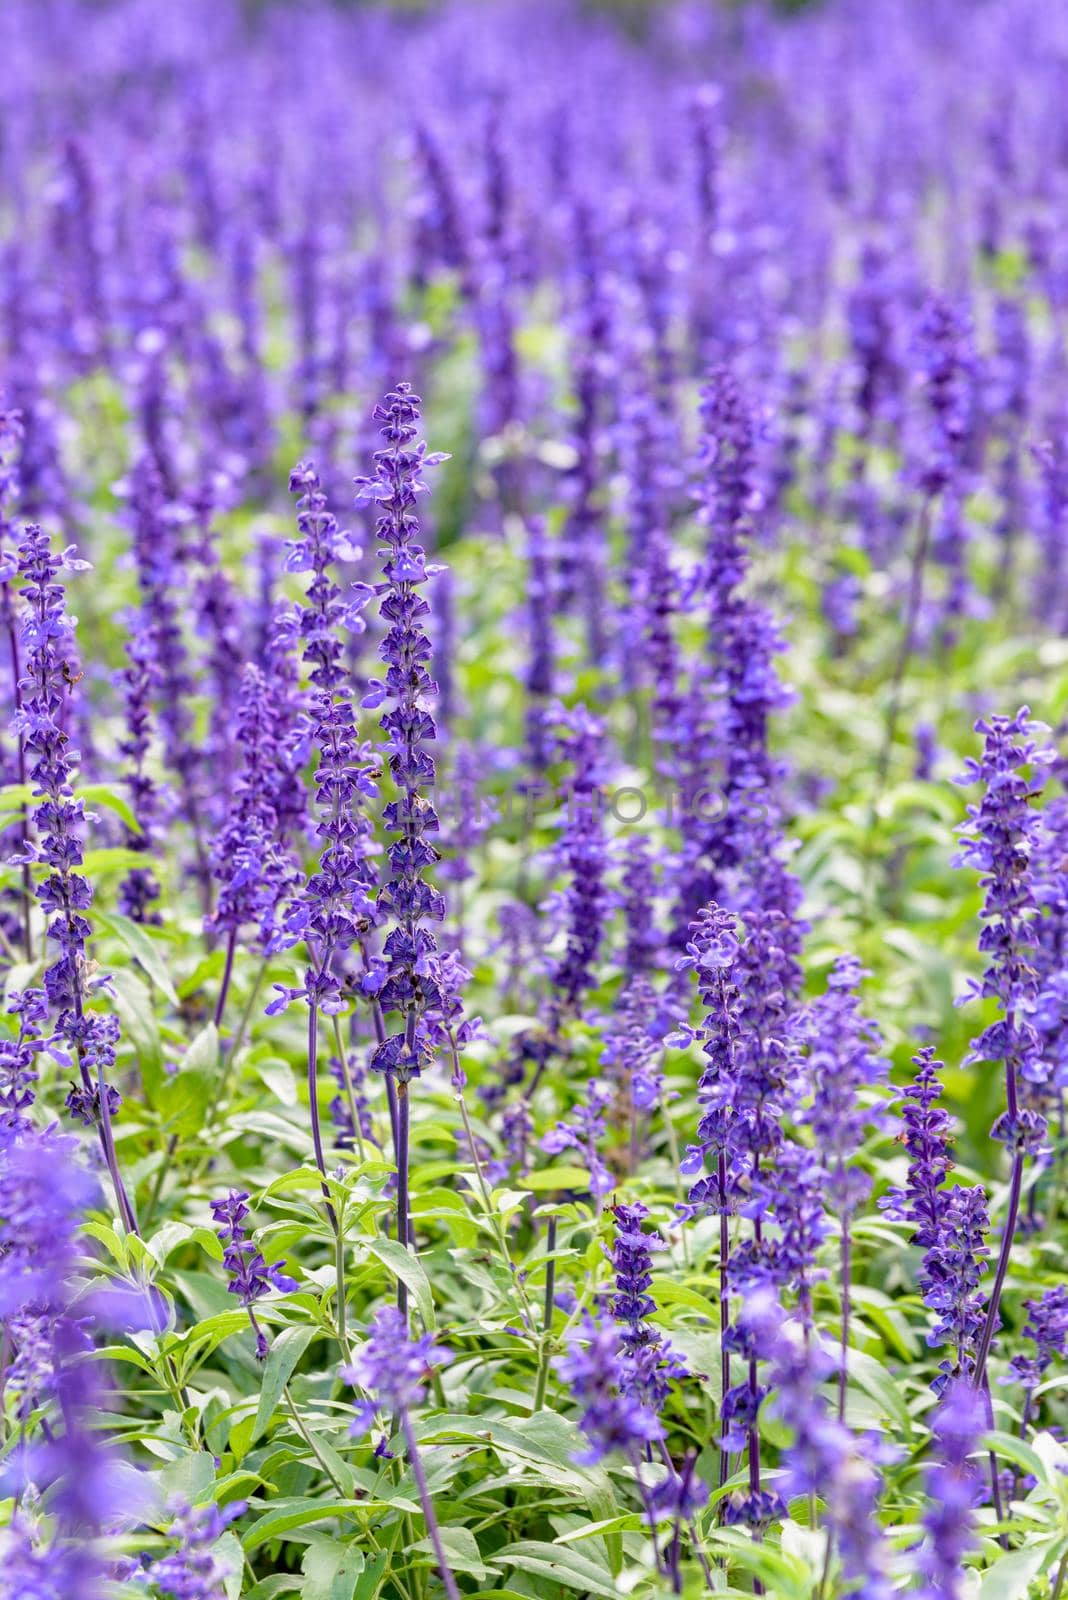 Purple or blue flowers beautiful nature of Salvia Farinacea or Mealy Cup Sage in the flower garden